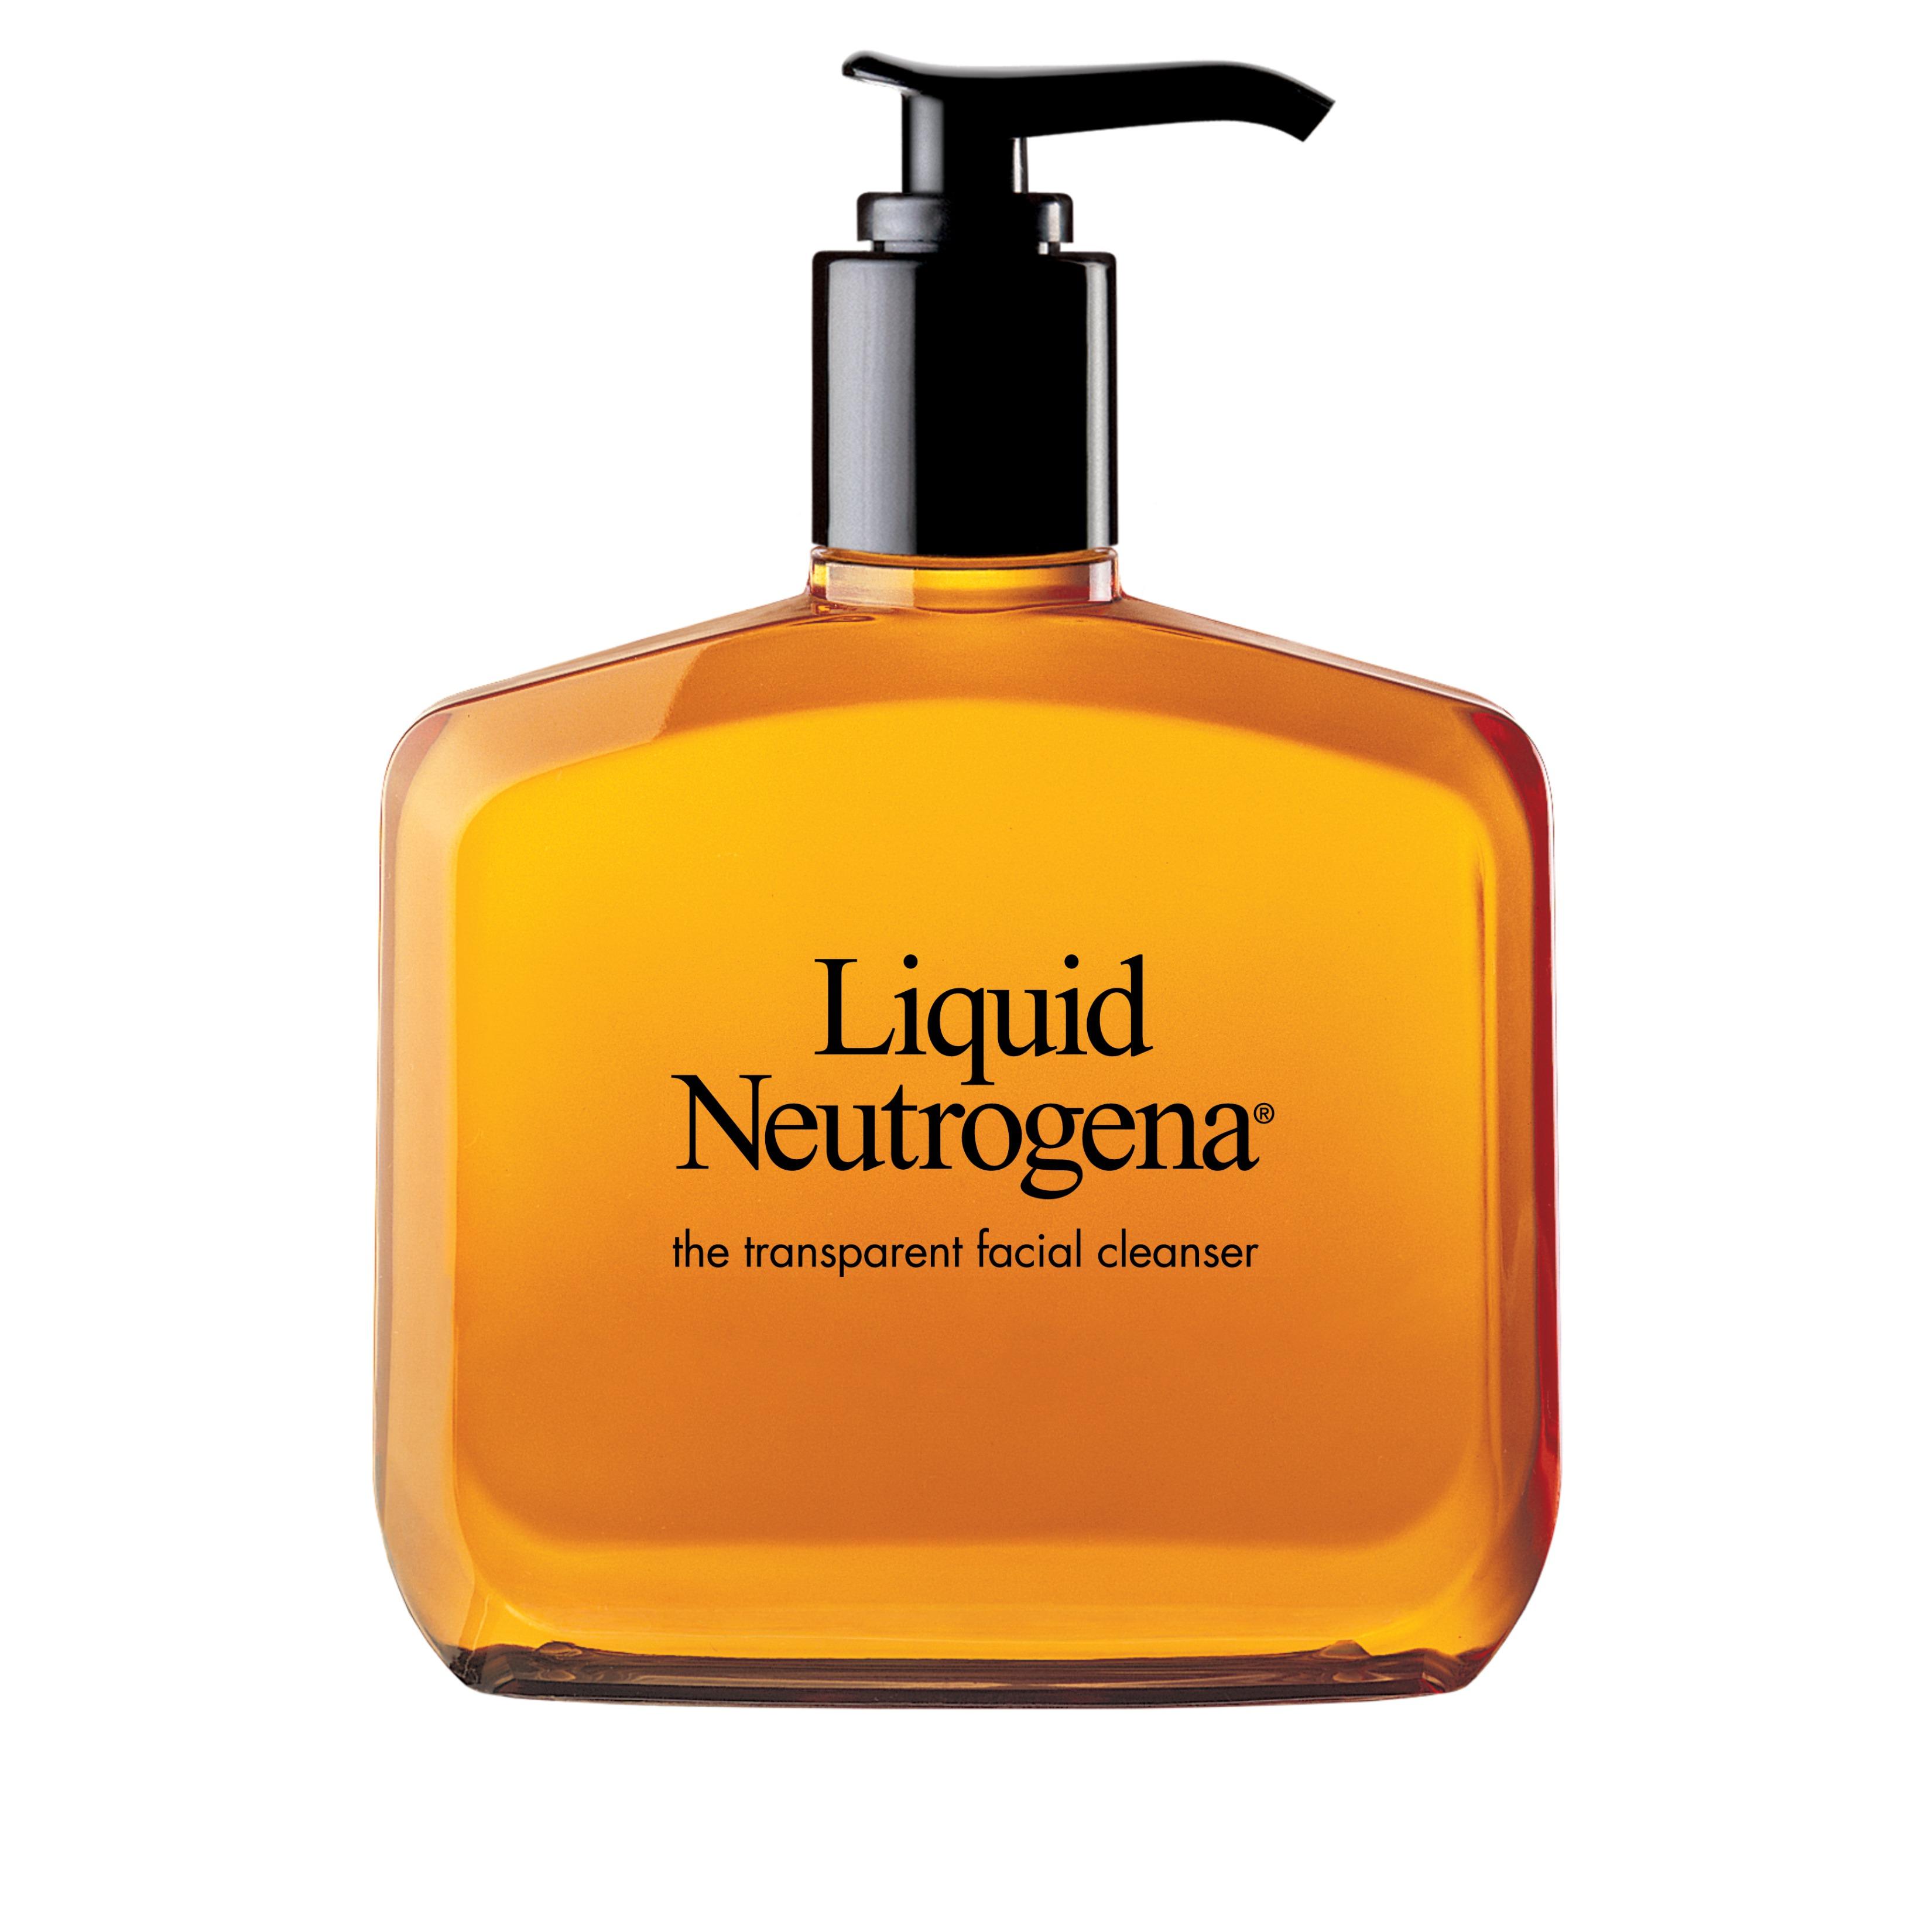 Liquid Neutrogena Facial Cleanser Naked Images Comments